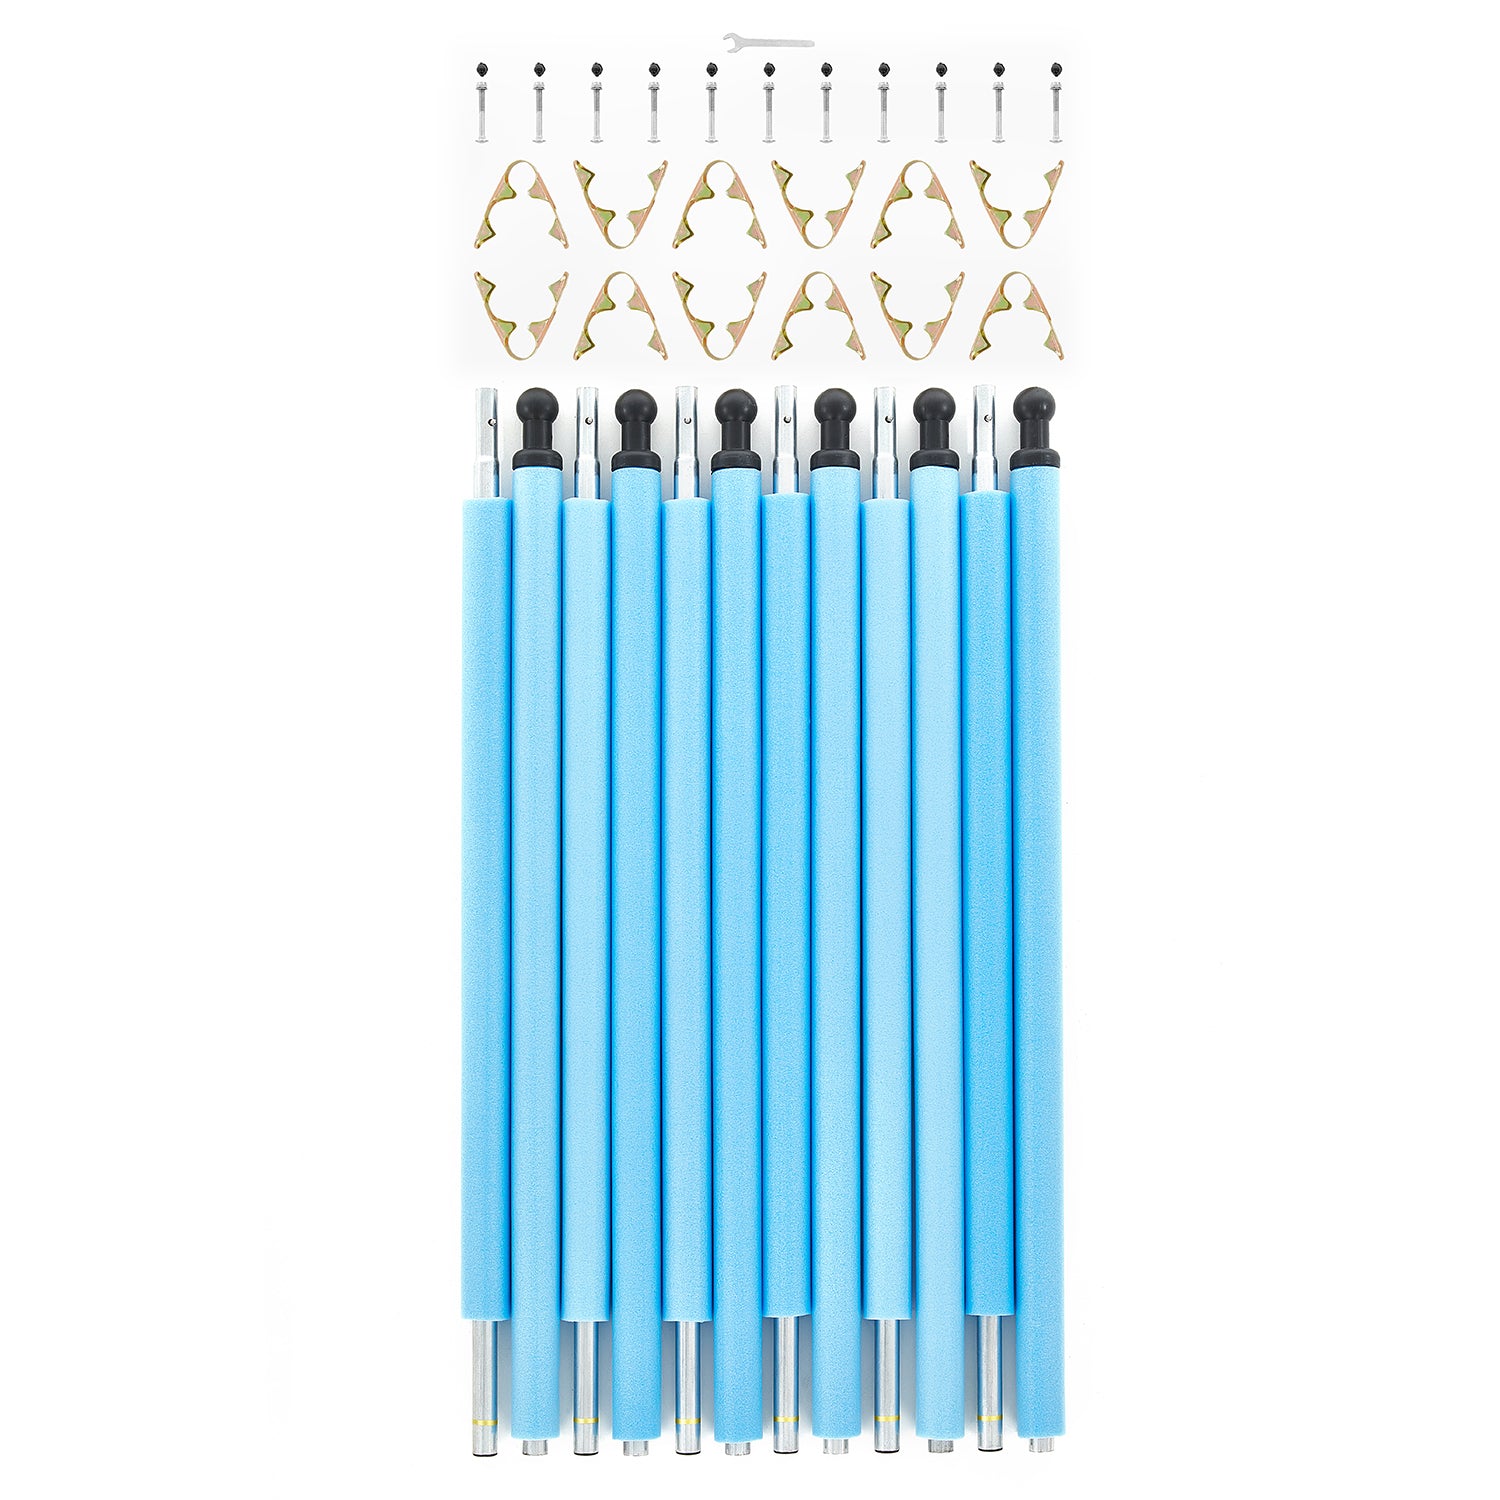 SkyBound Universal Replacement Enclosure Poles and Hardware - Complete Set of 6 Poles - Net not Included - Blue.